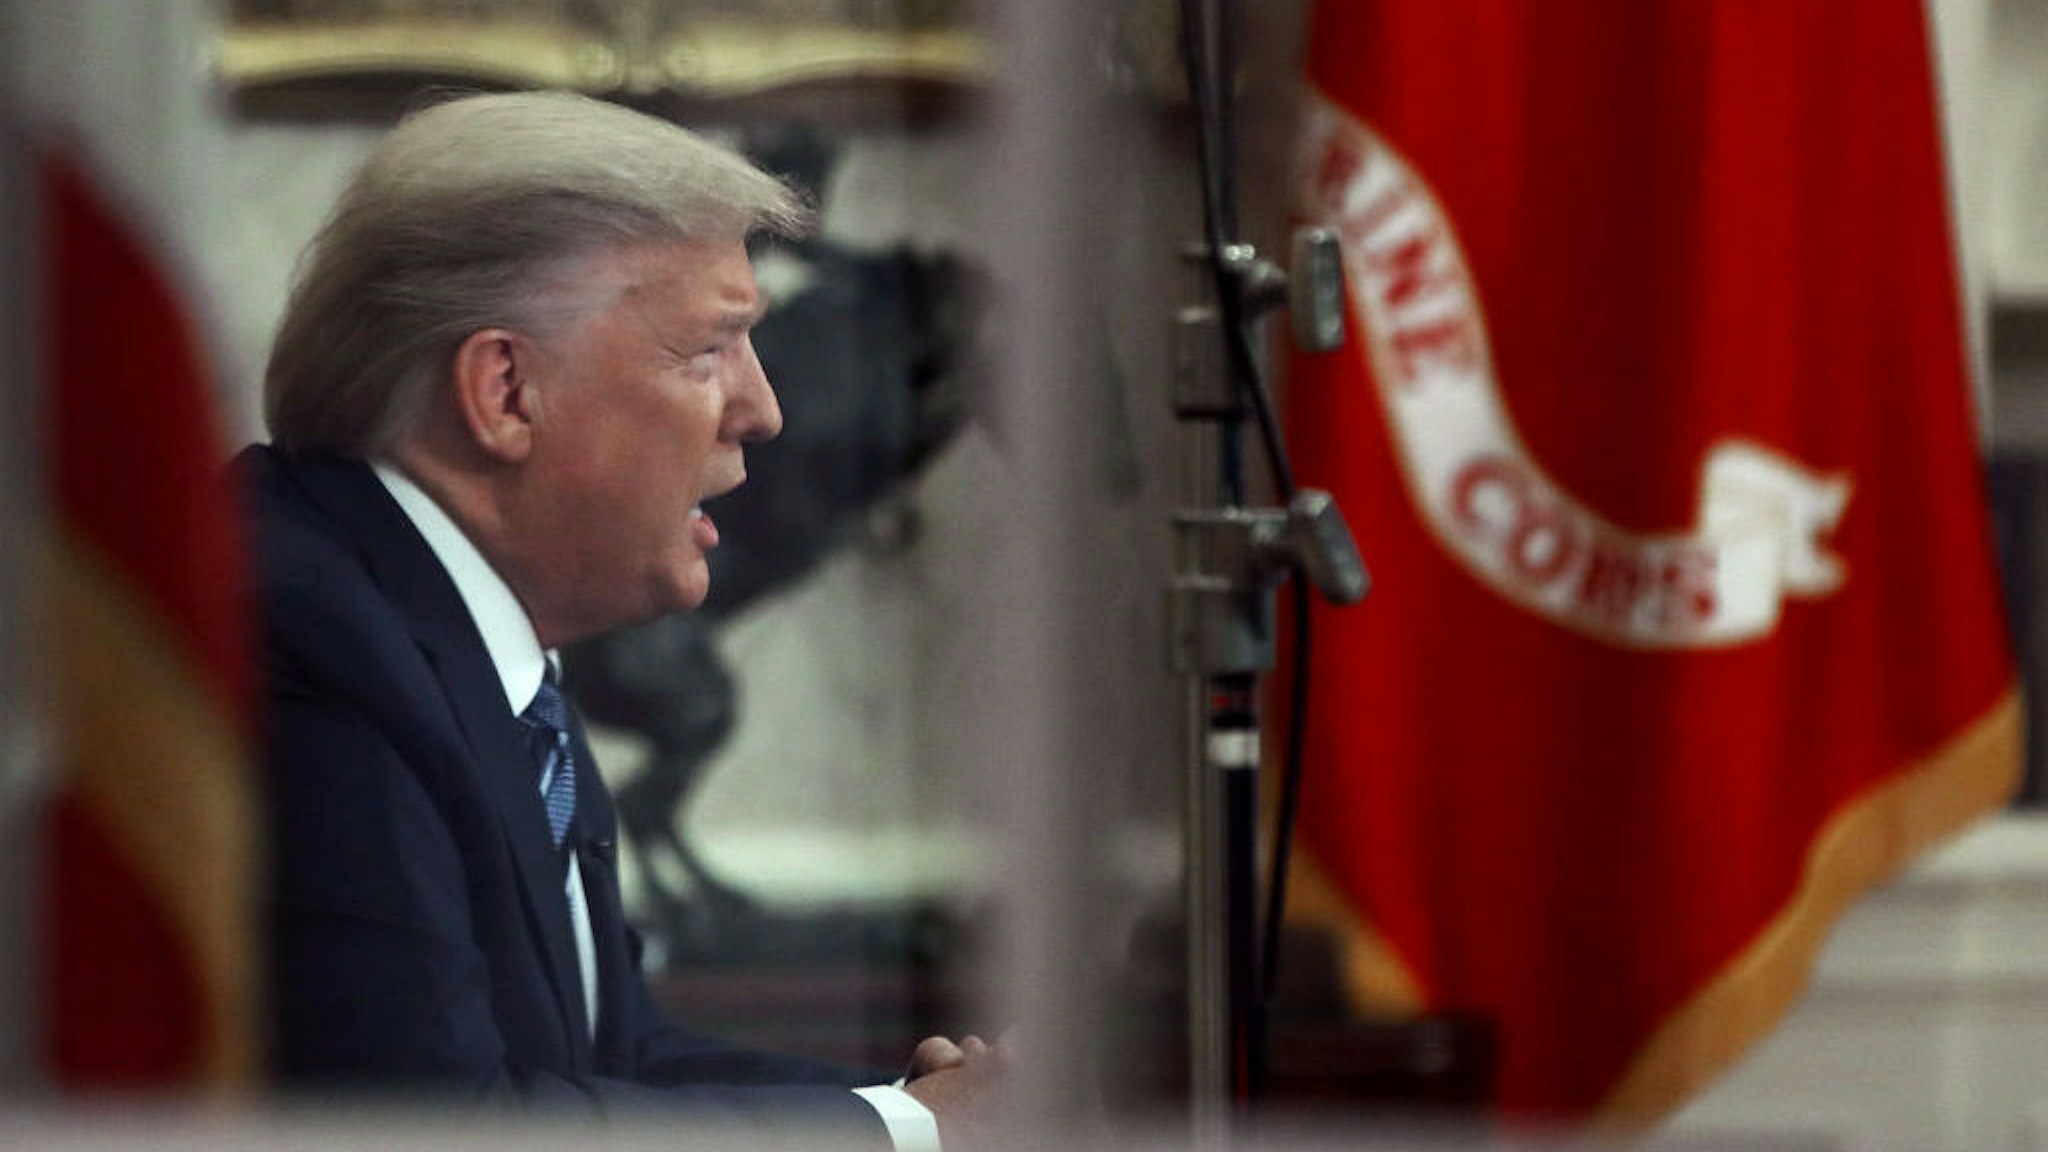 President Donald Trump is seen through a window in the Oval Office as he addresses the nation on the response to the COVID-19 coronavirus, on March 11, 2020 in Washington, DC. (Photo by Mark Wilson/Getty Images)